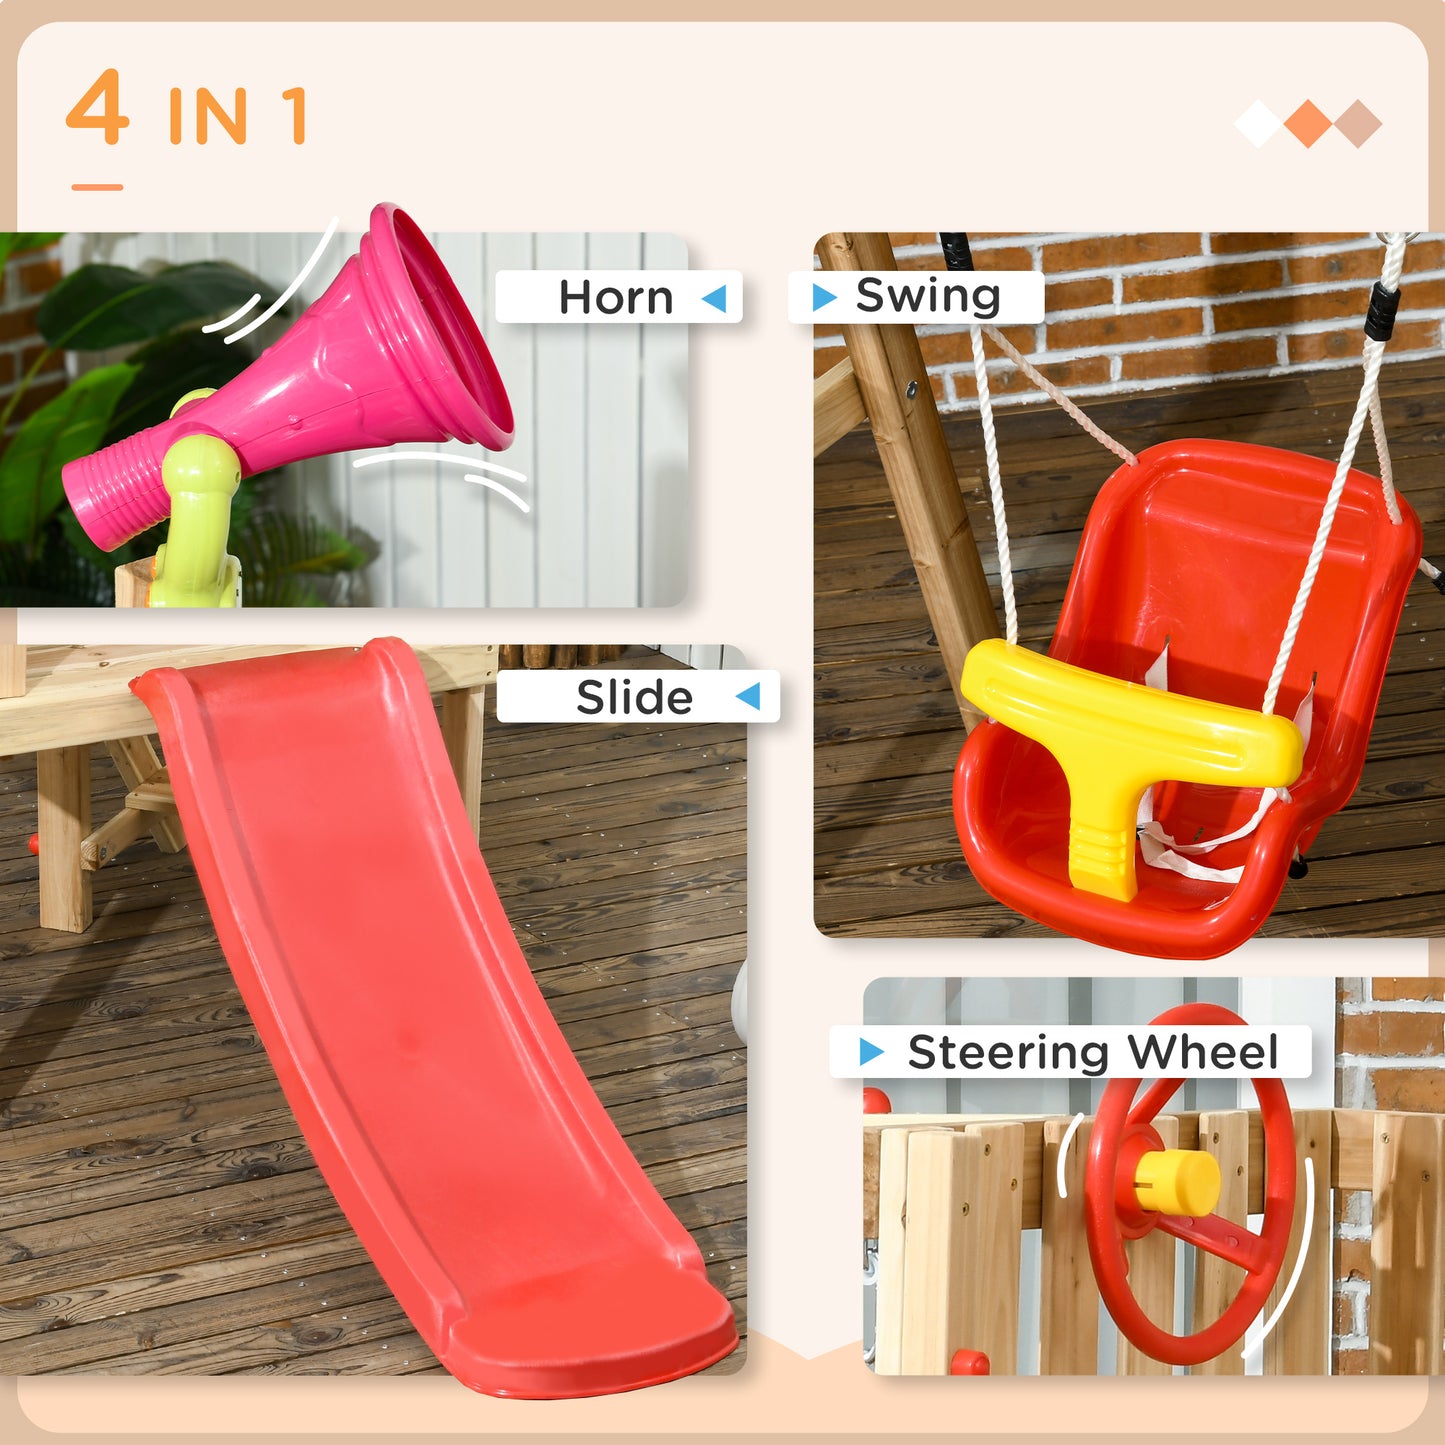 Outsunny Wooden Swing and Slide Set for Toddler 18-48 Months Outdoor Use - Red and Brown